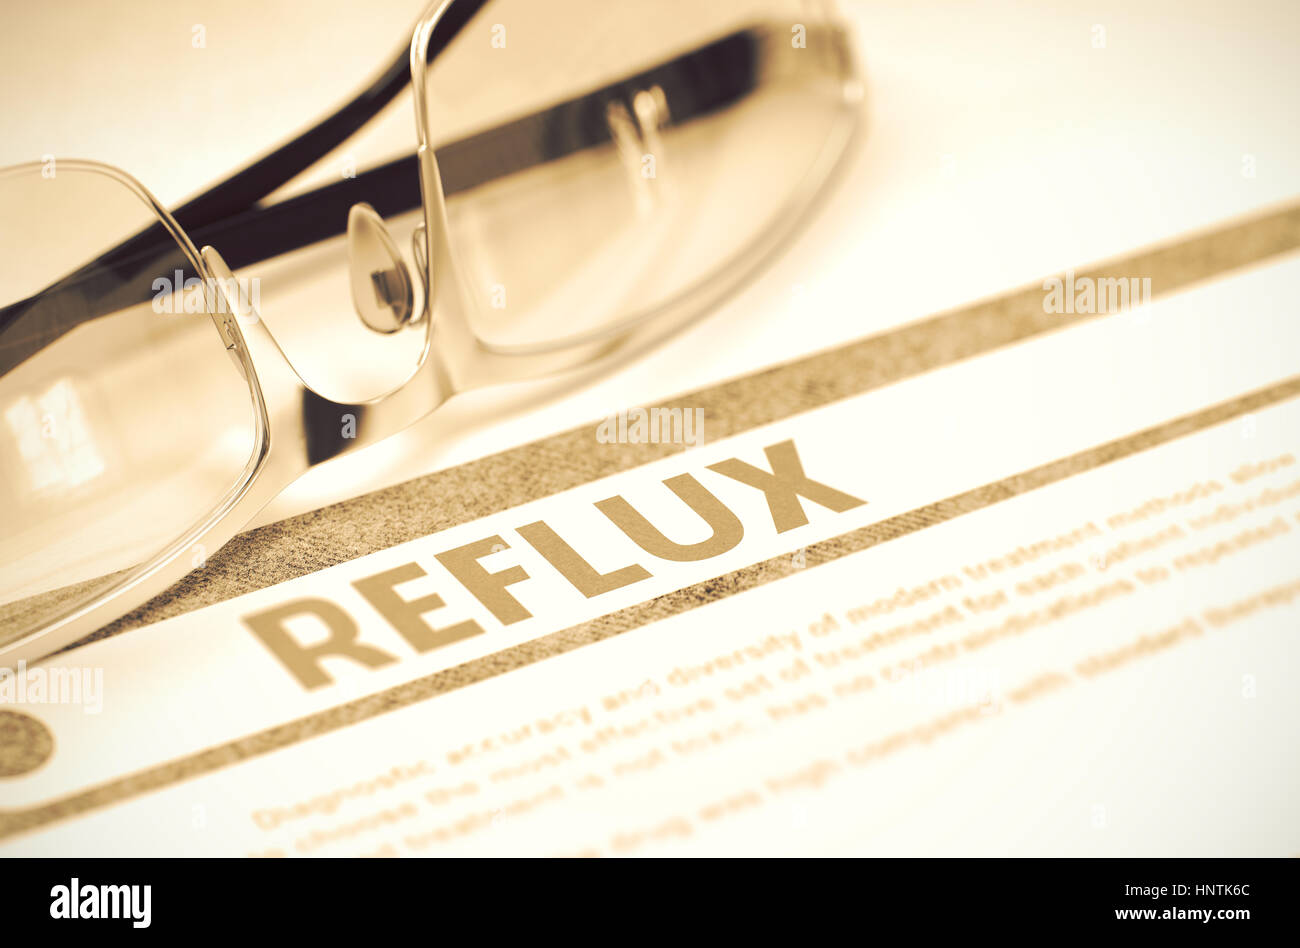 Reflux. Medical Concept on Red Background. 3D Illustration. Stock Photo